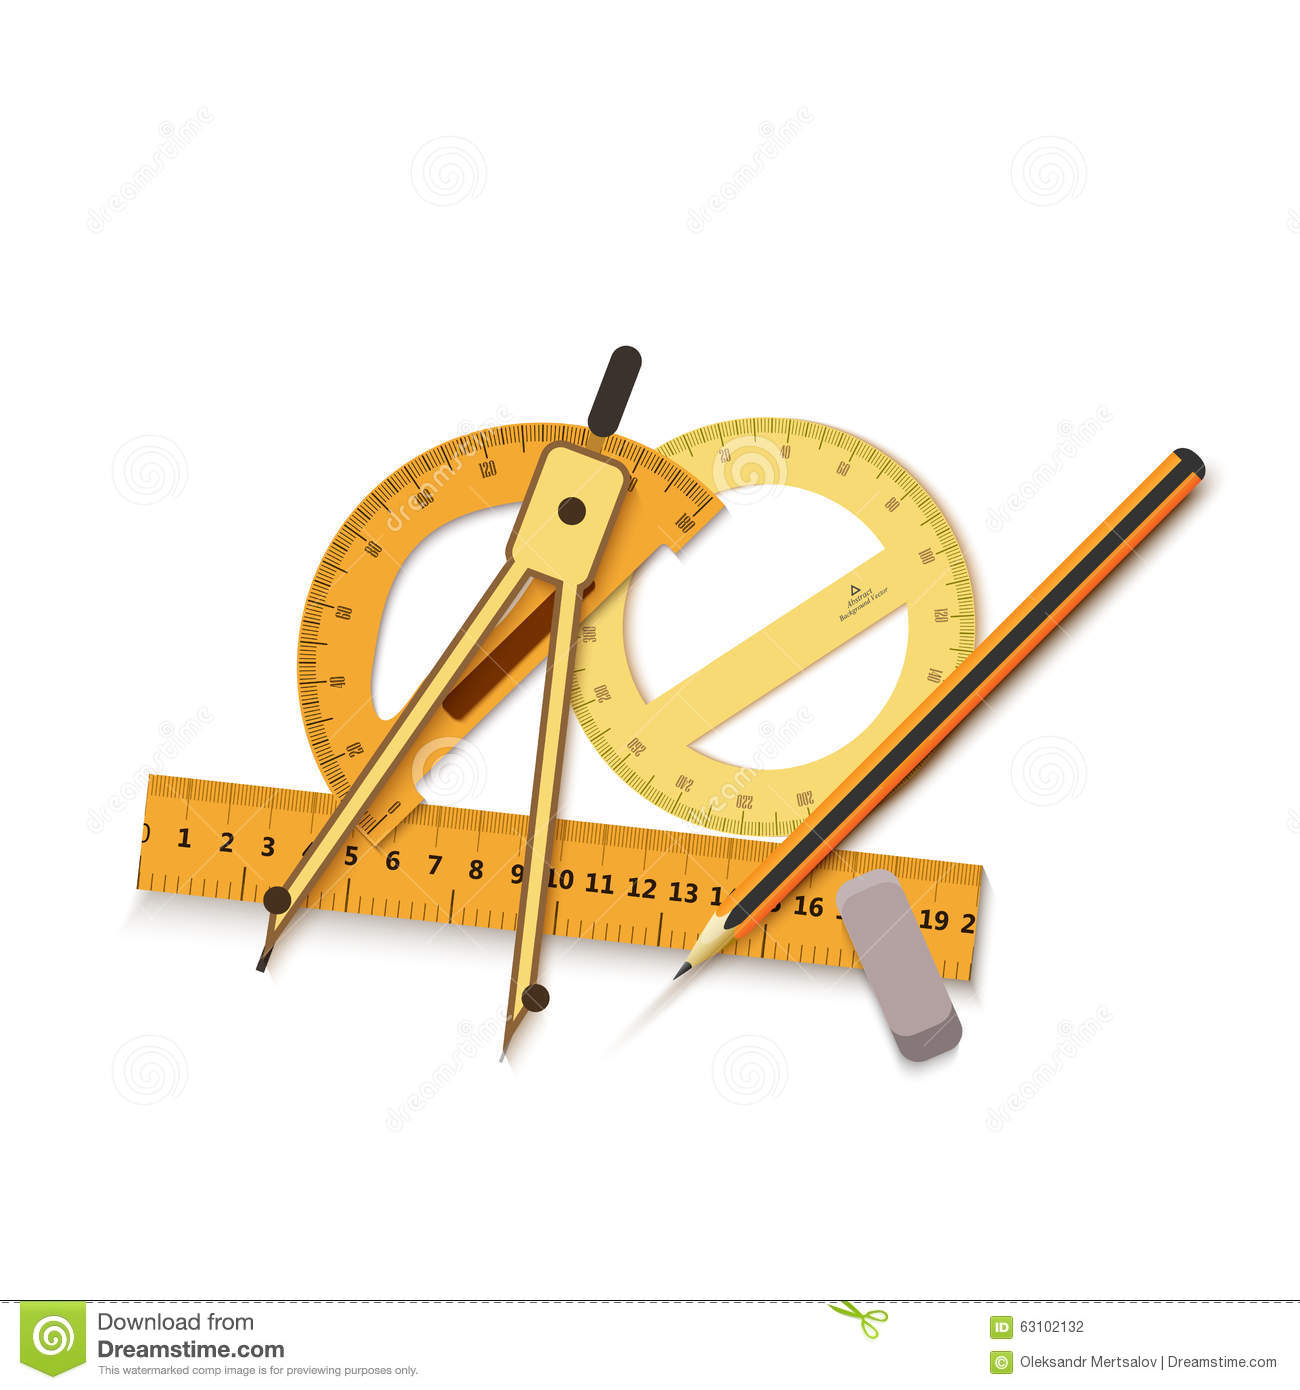 Engineering Tools Clipart.